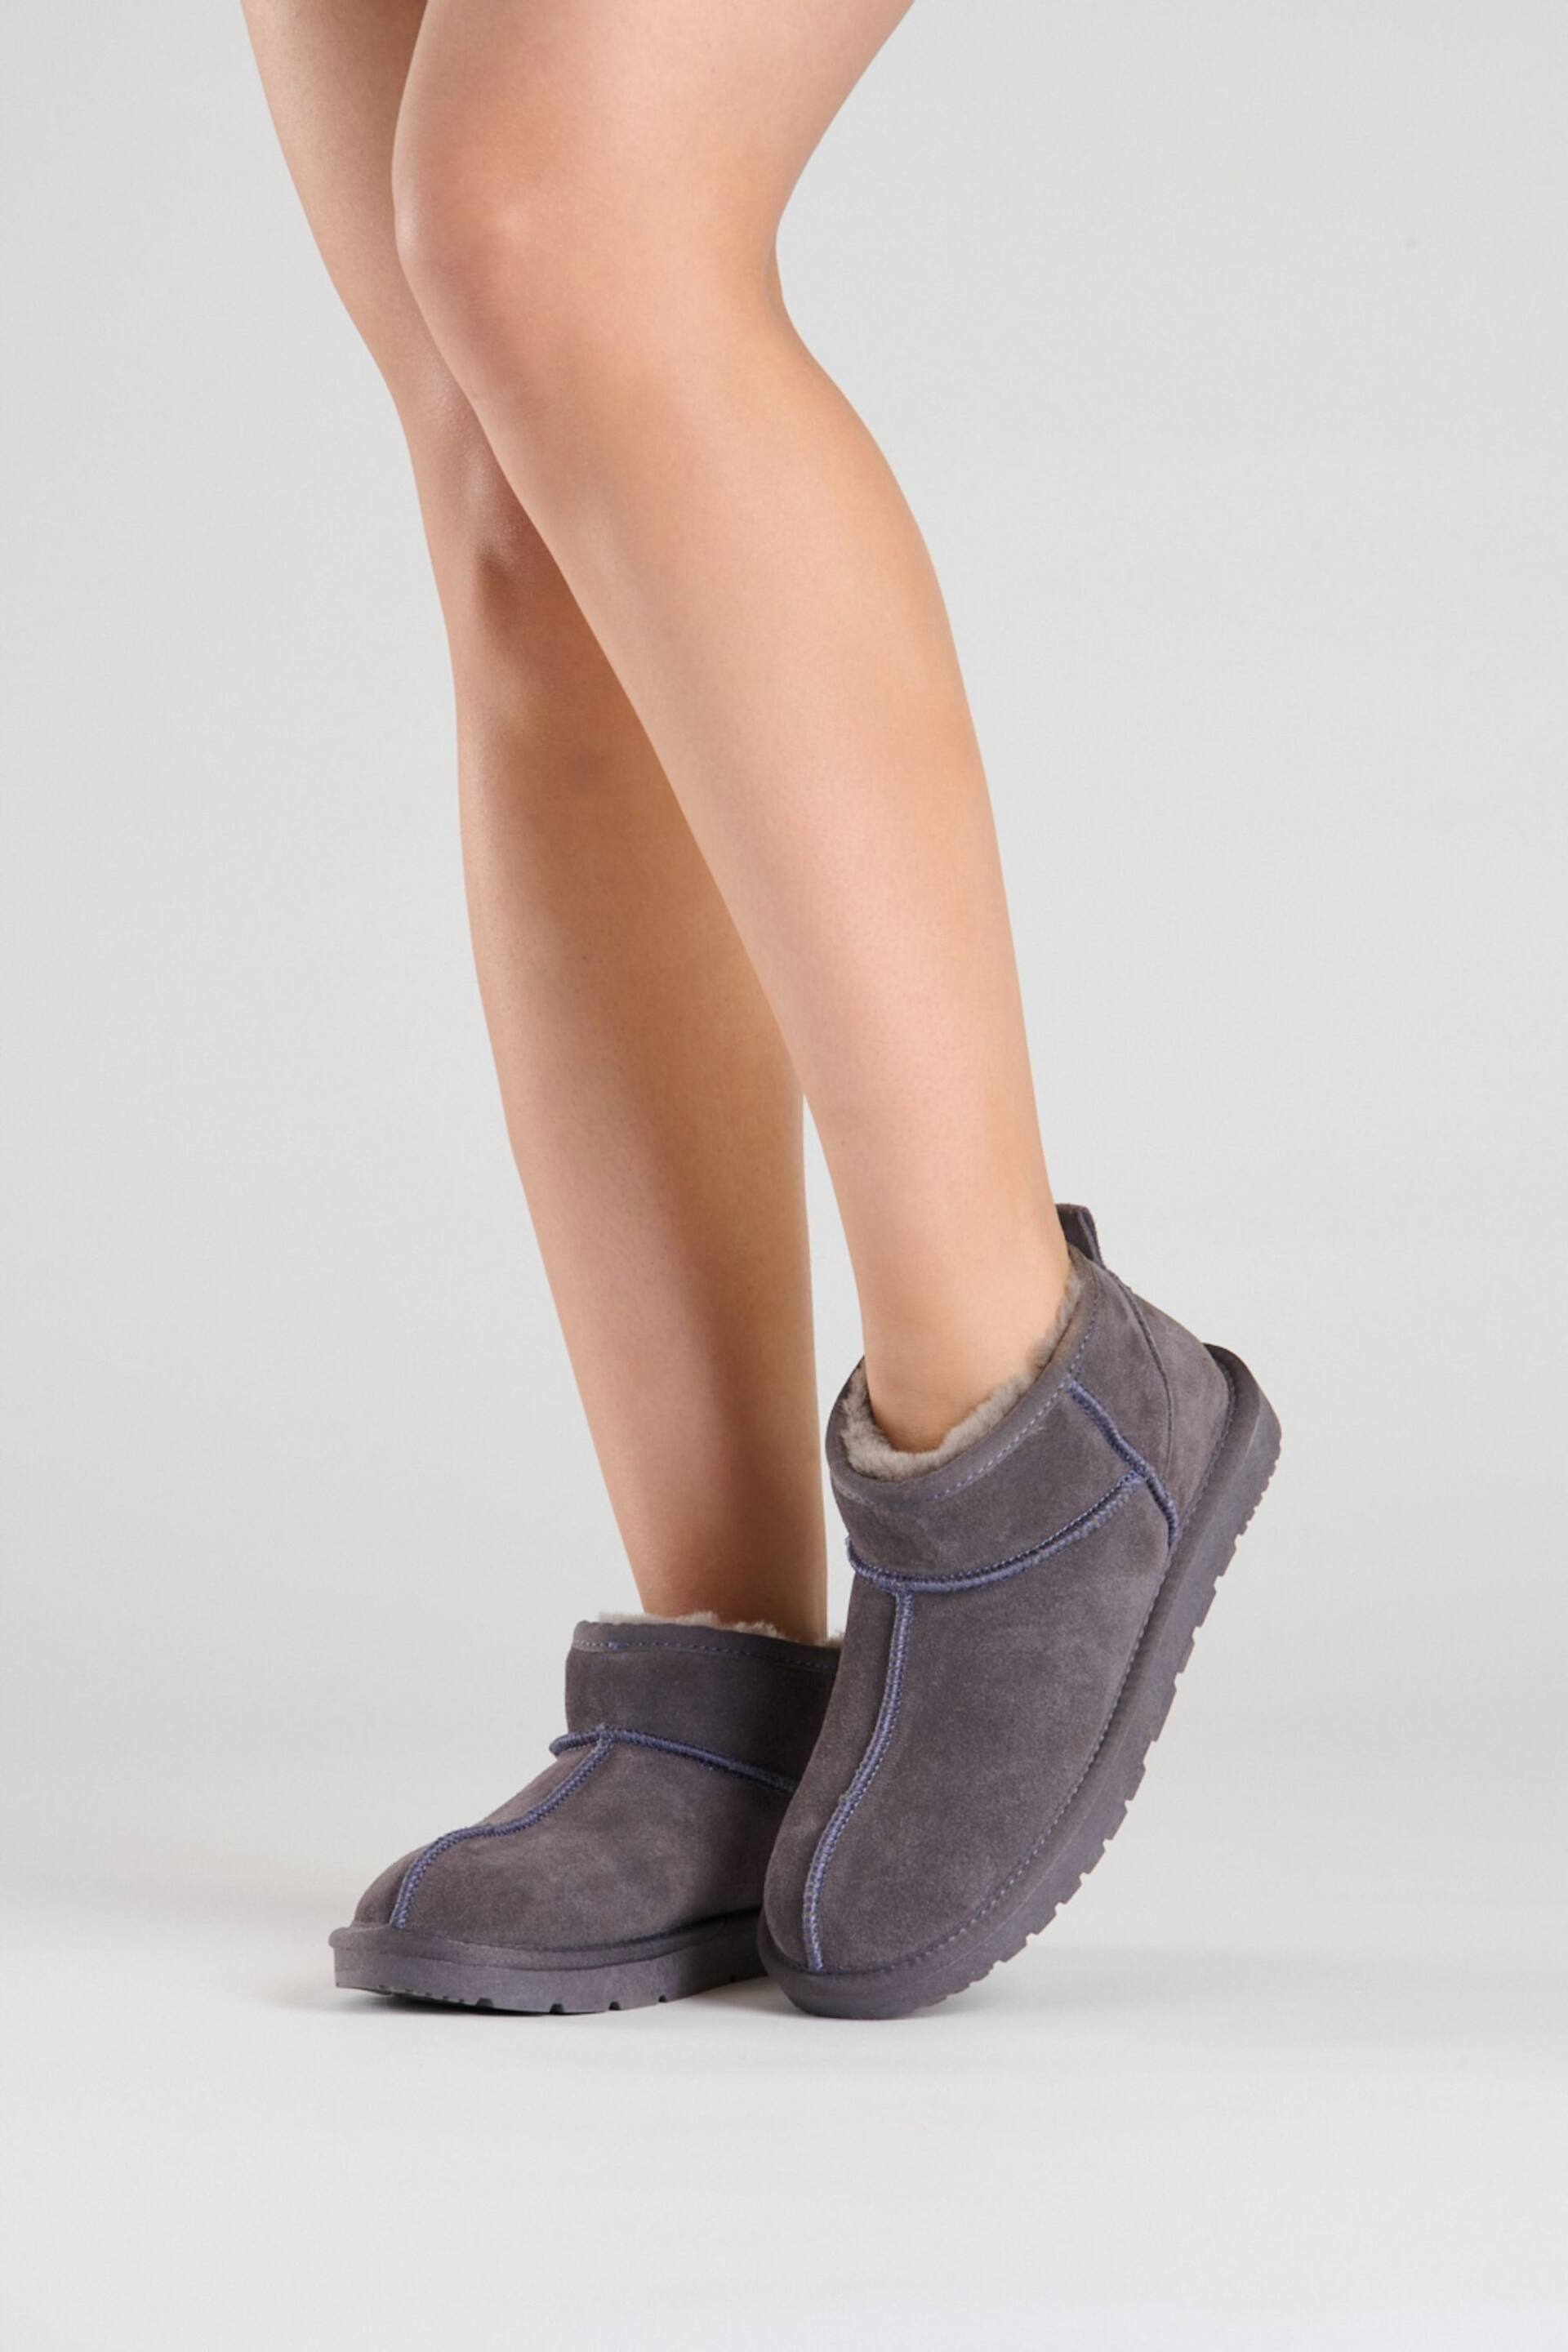 Loungeable Grey Real Sheepskin Mini Boot Slippers - Image 2 of 2